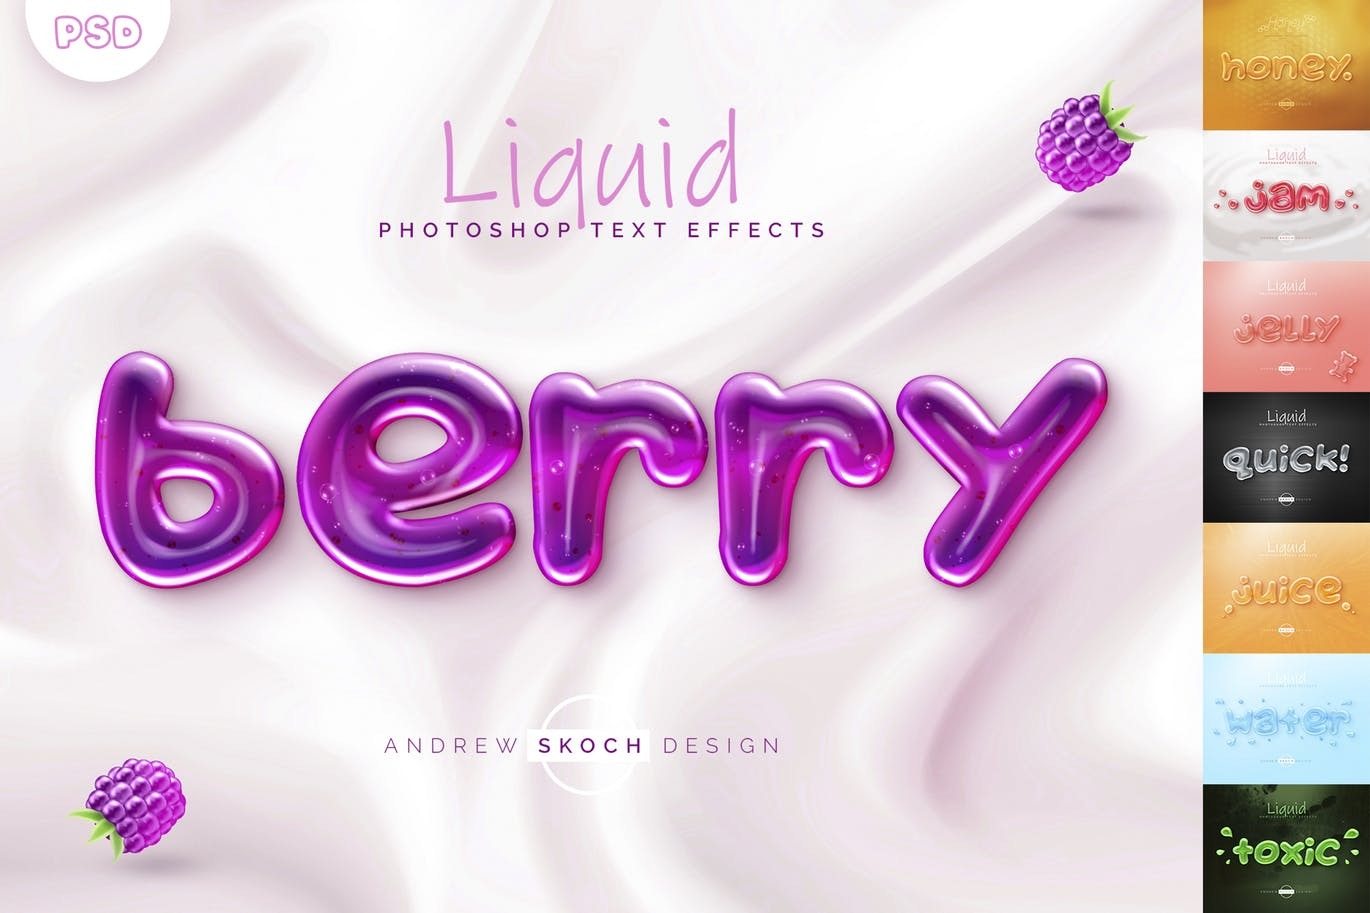 A liquid tasty text effect for photoshop